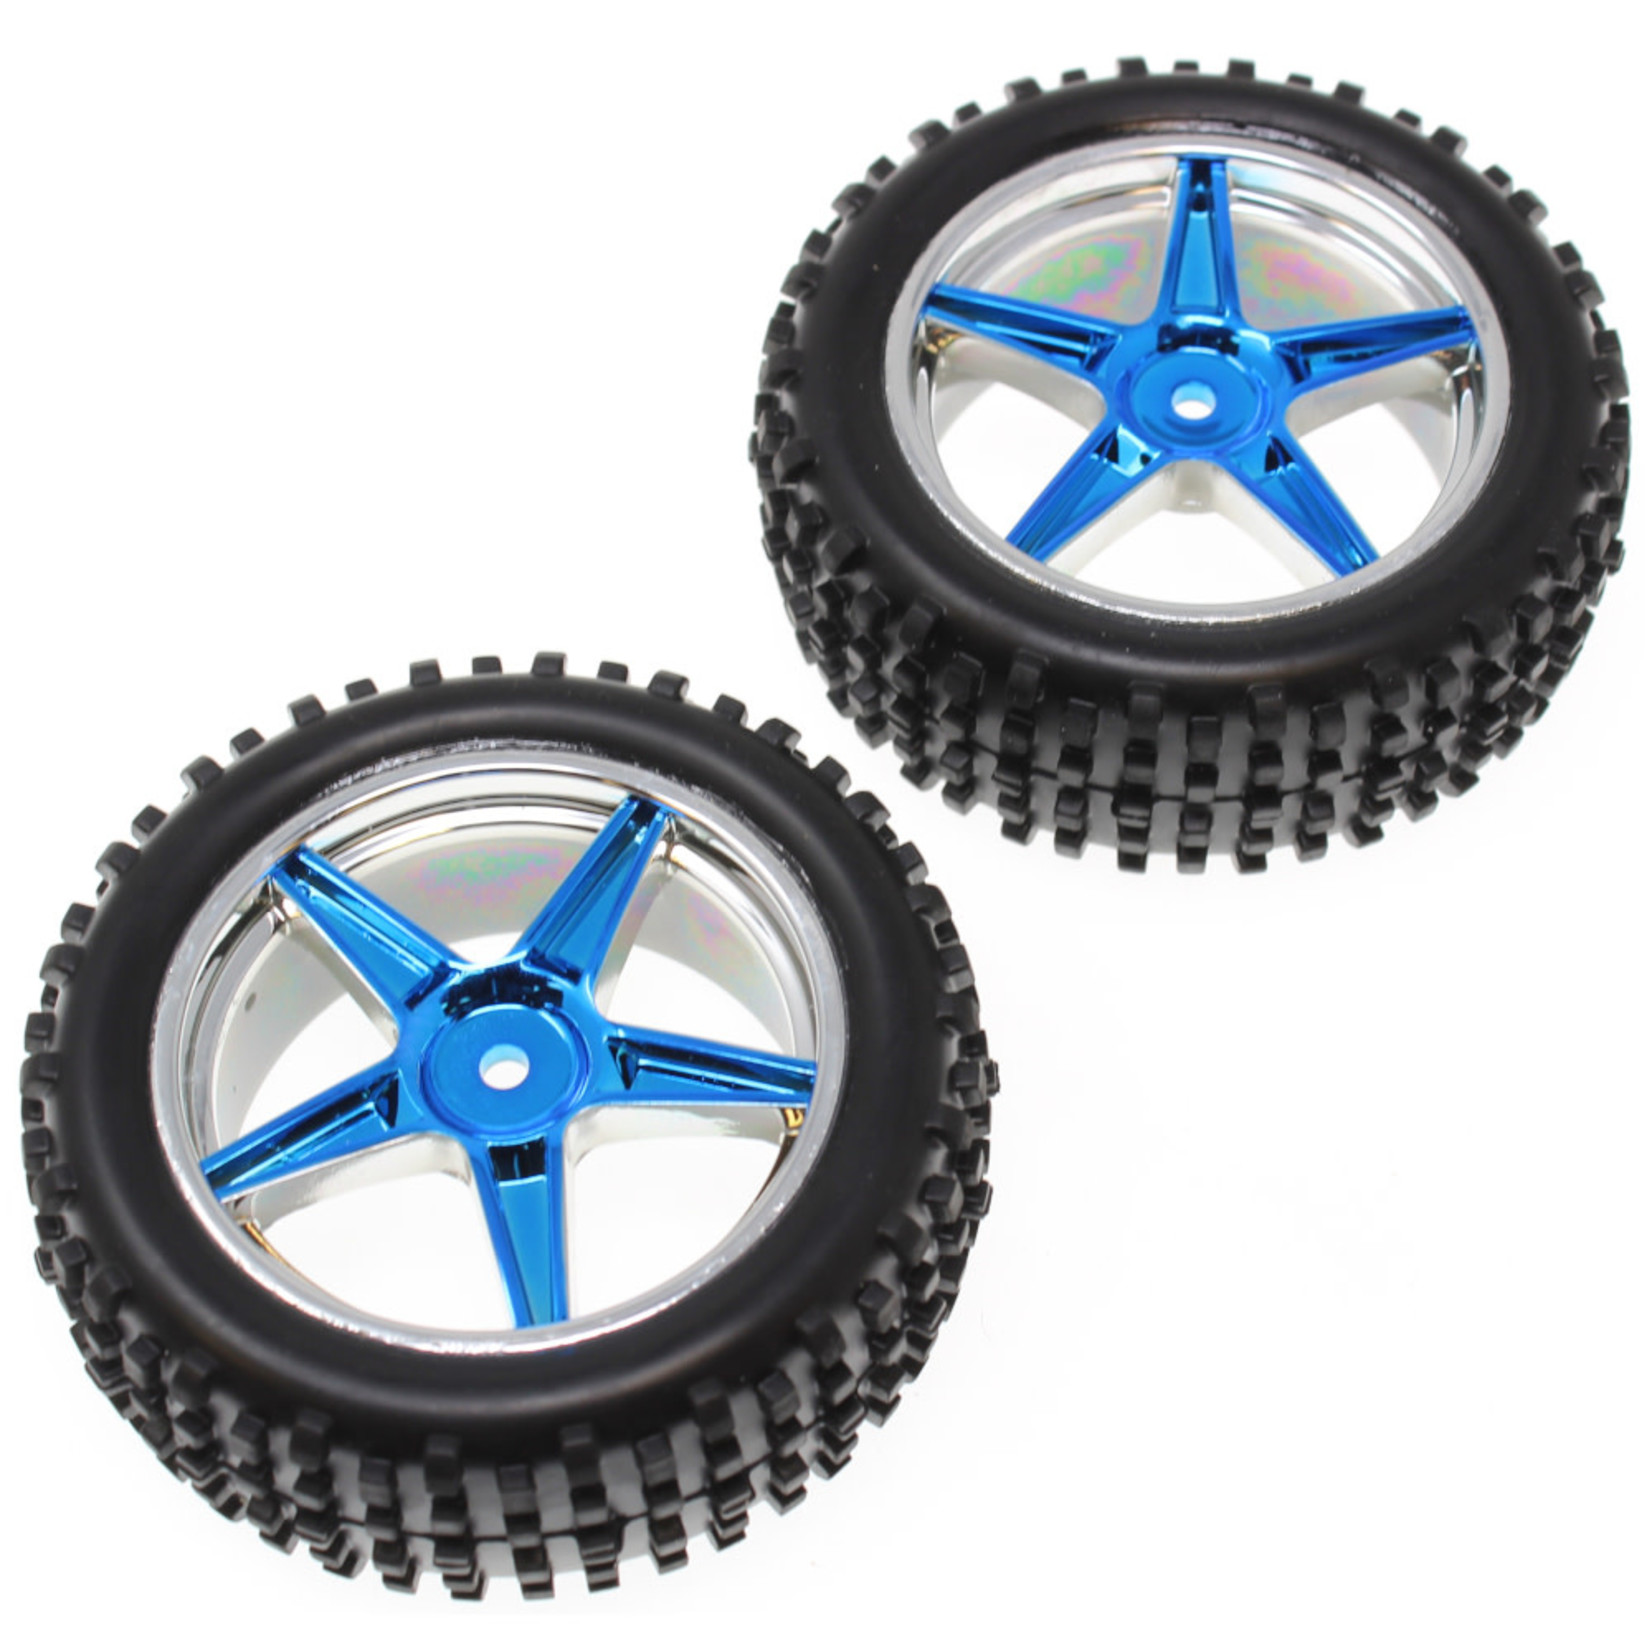 Redcat Racing Pre-Mounted 1/10th Buggy Front Tires and Wheels (Blue/Chrome)(1pr)